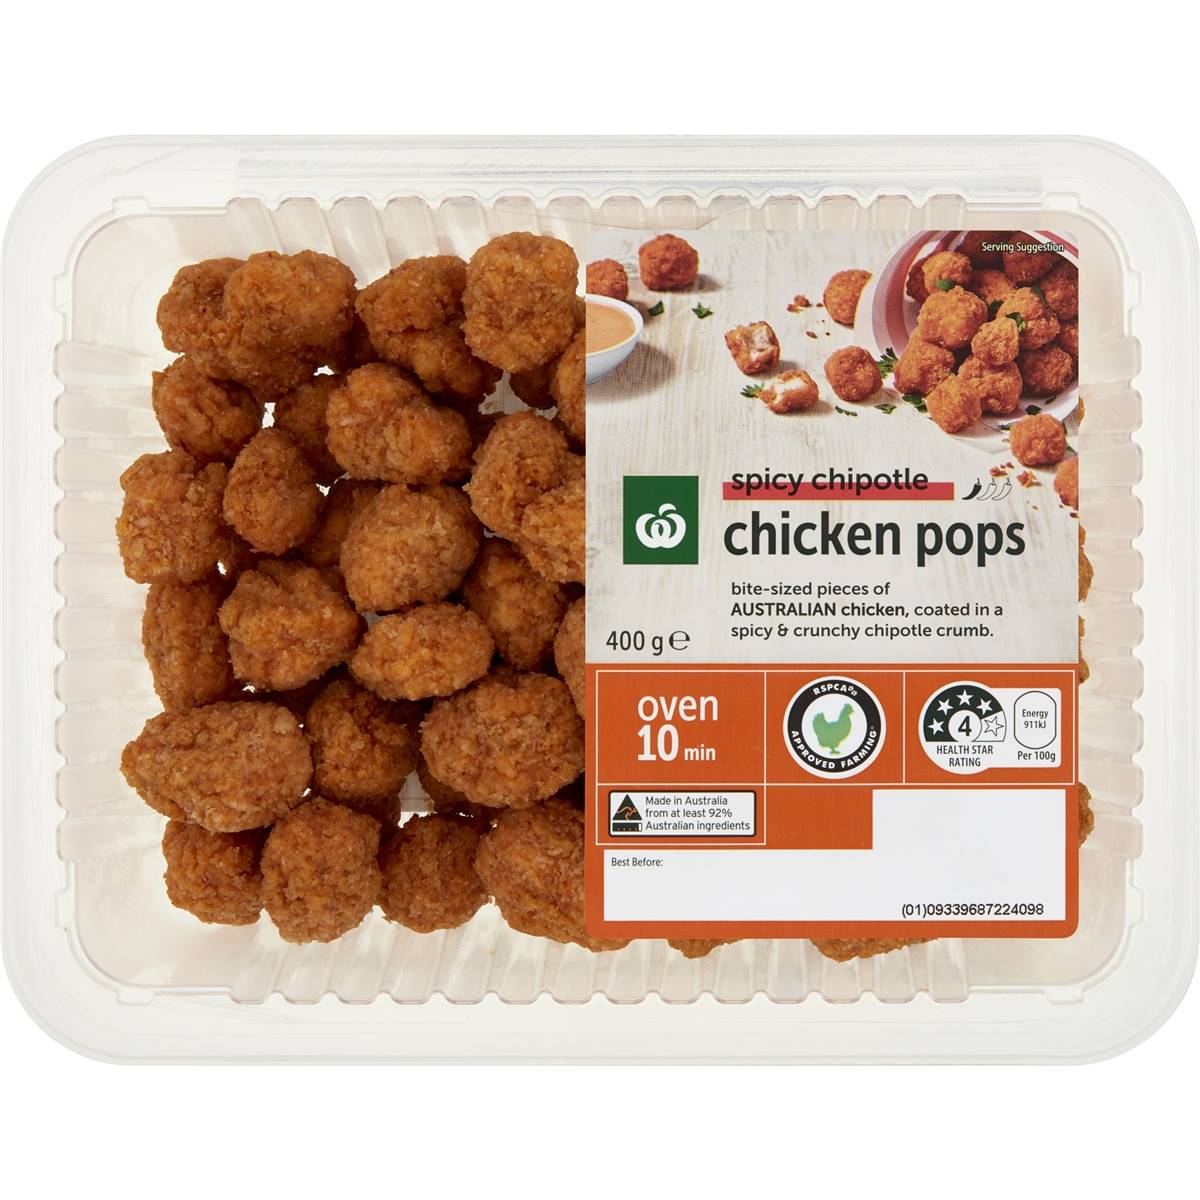 Calories in Woolworths Spicy Chipotle Chicken Pops